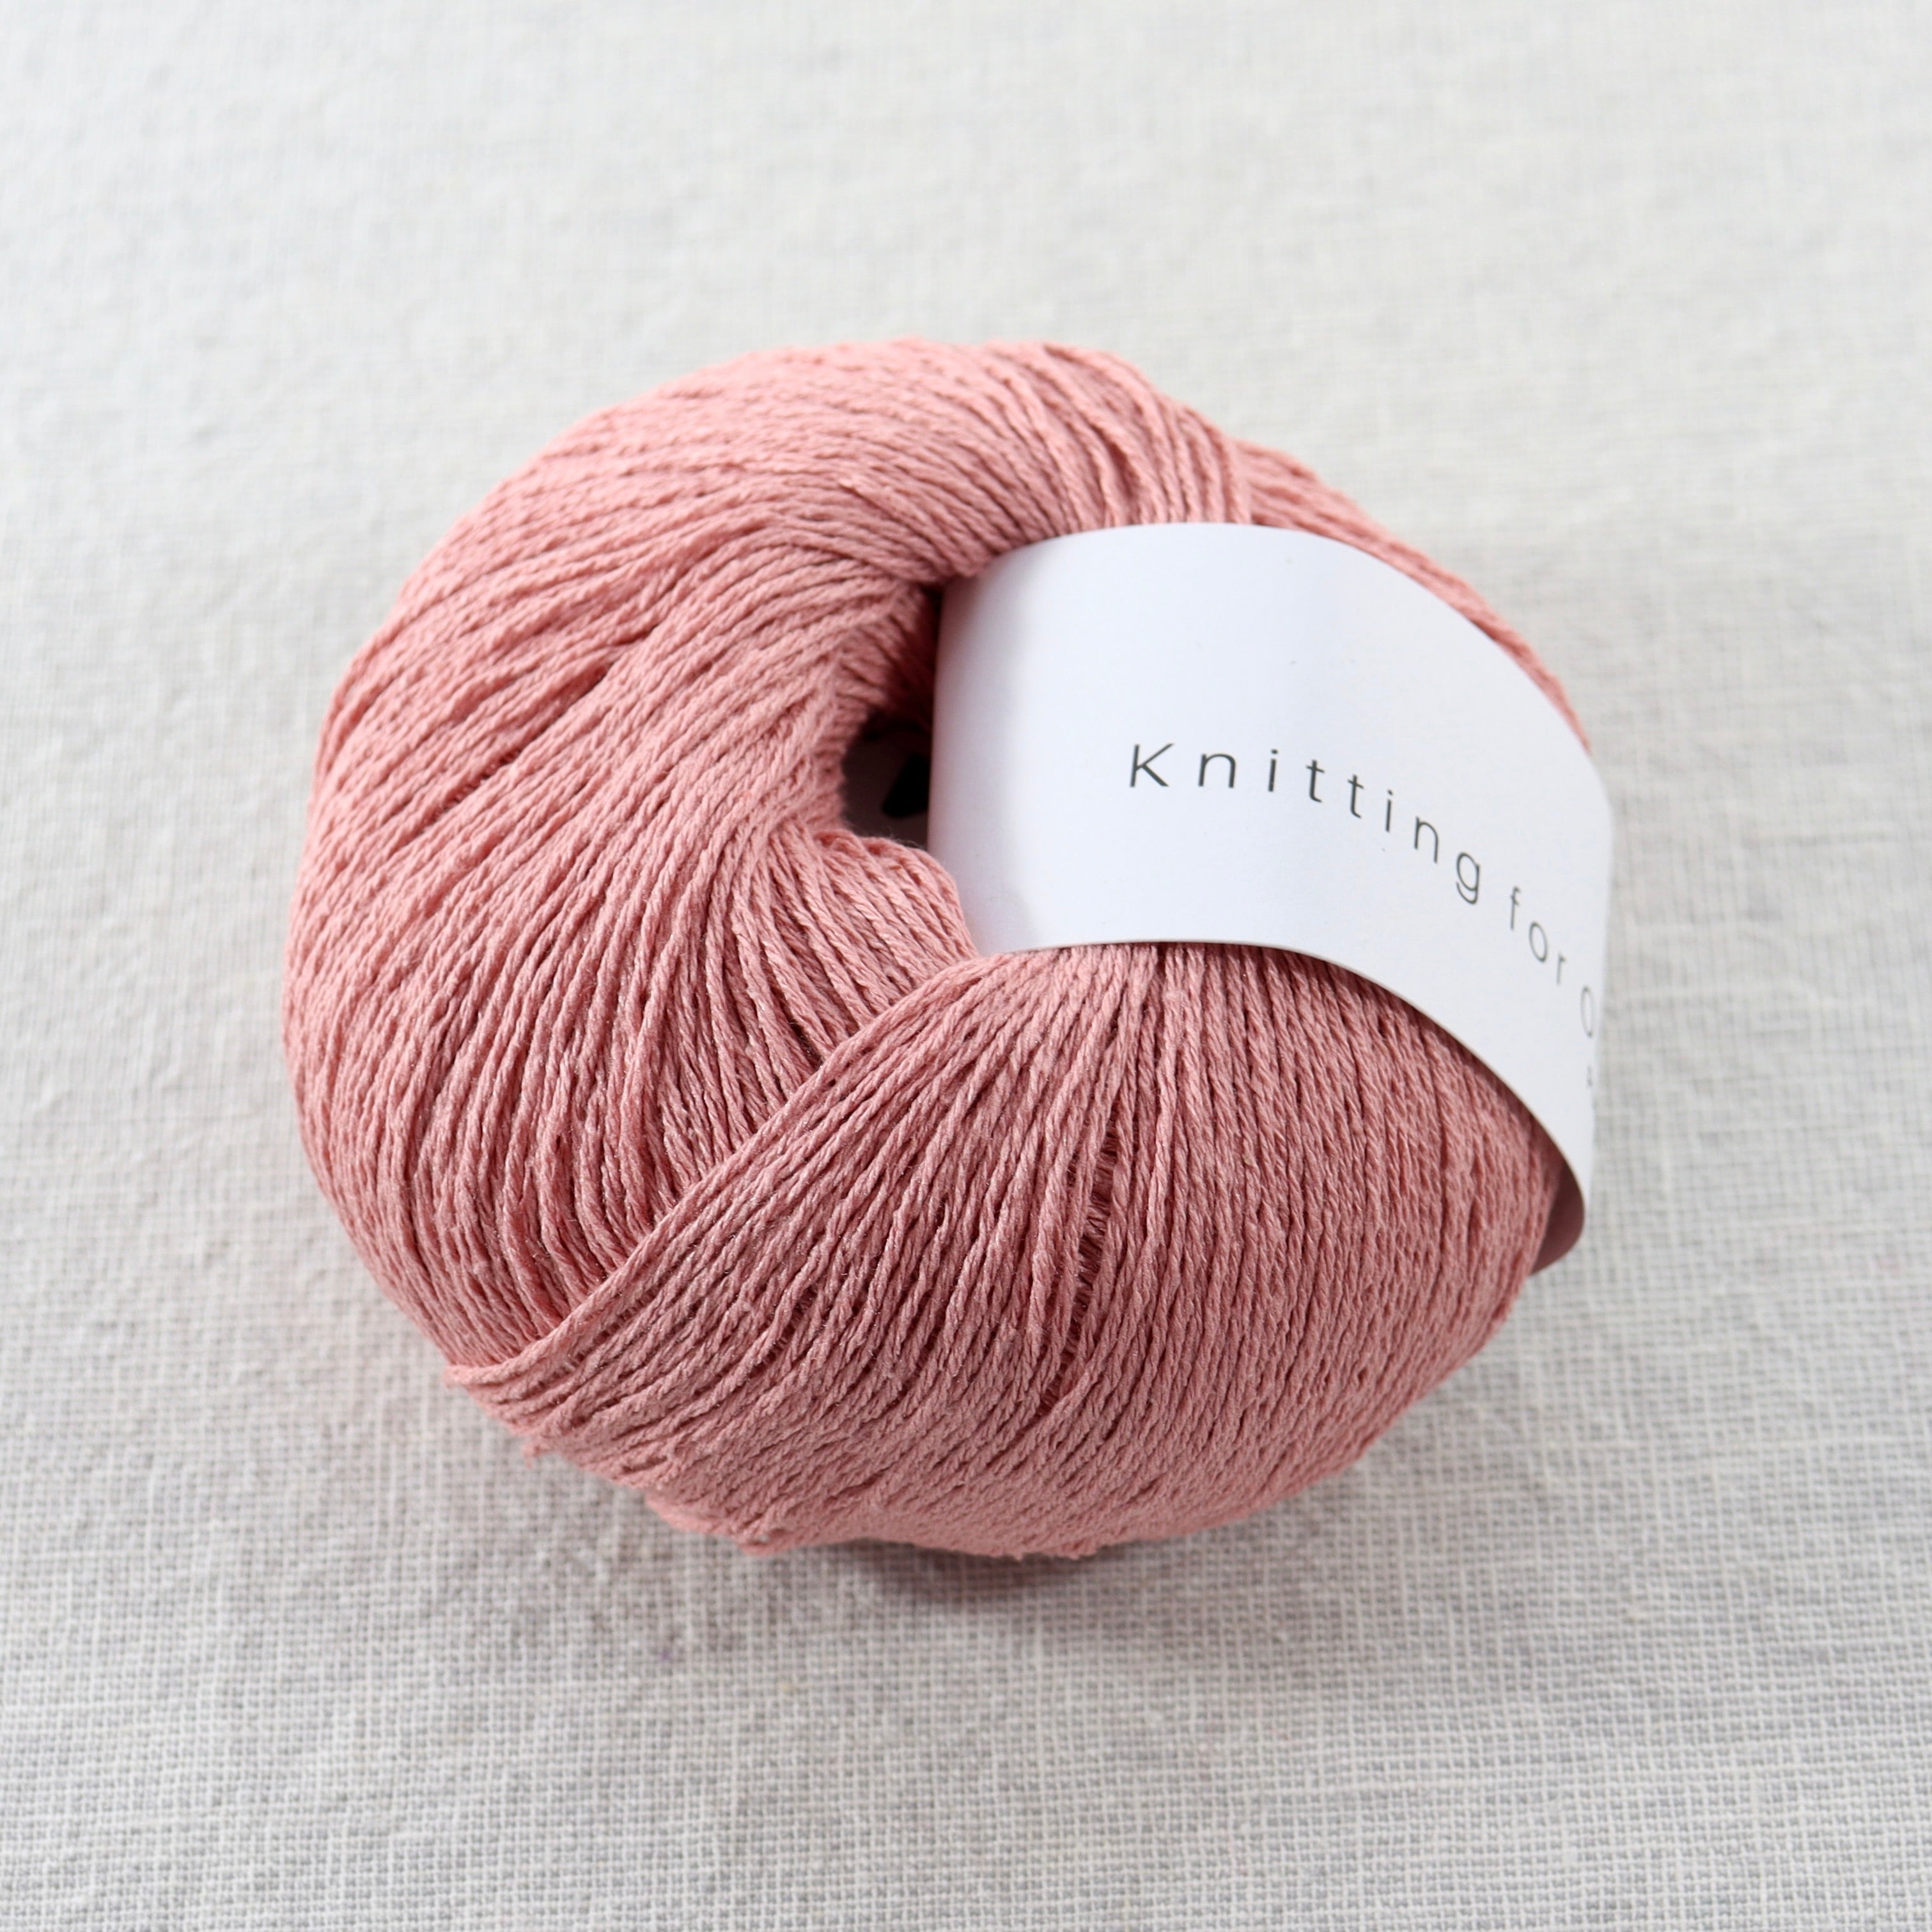 Knitting For Olive - Pure Silk